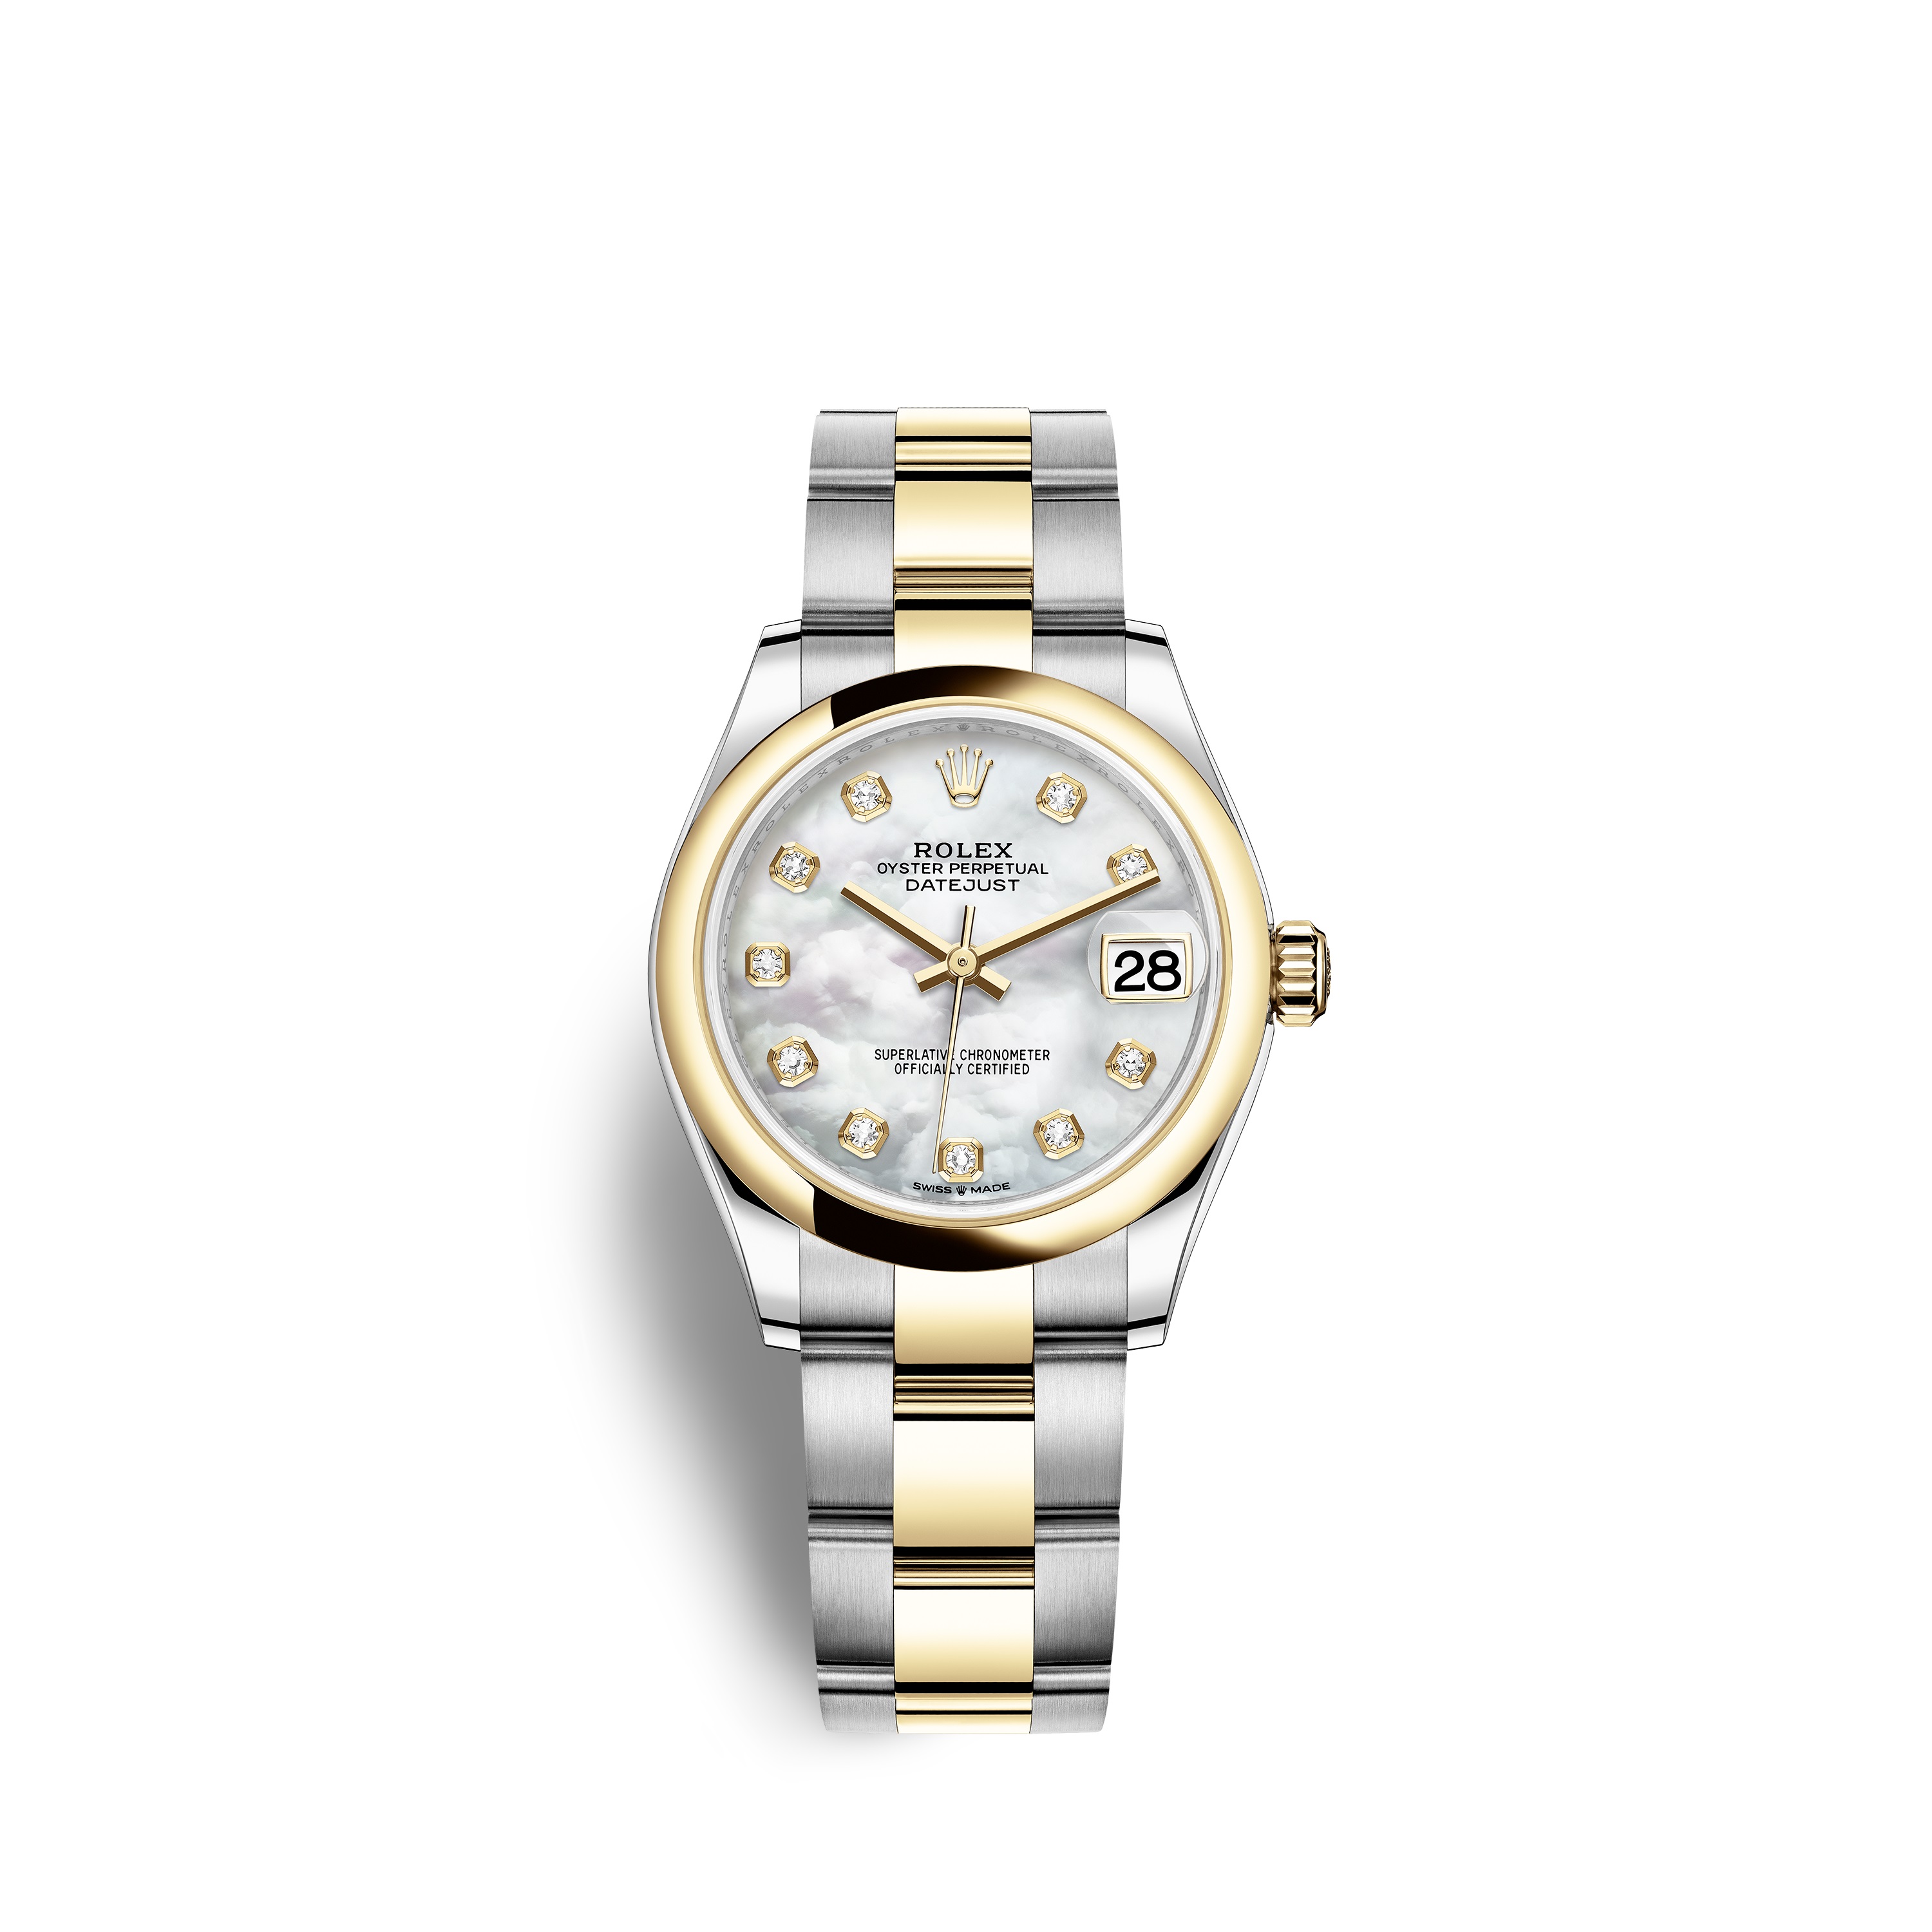 Datejust 31 278243 Gold & Stainless Watch (White Mother-of-Pearl Set with Diamonds)